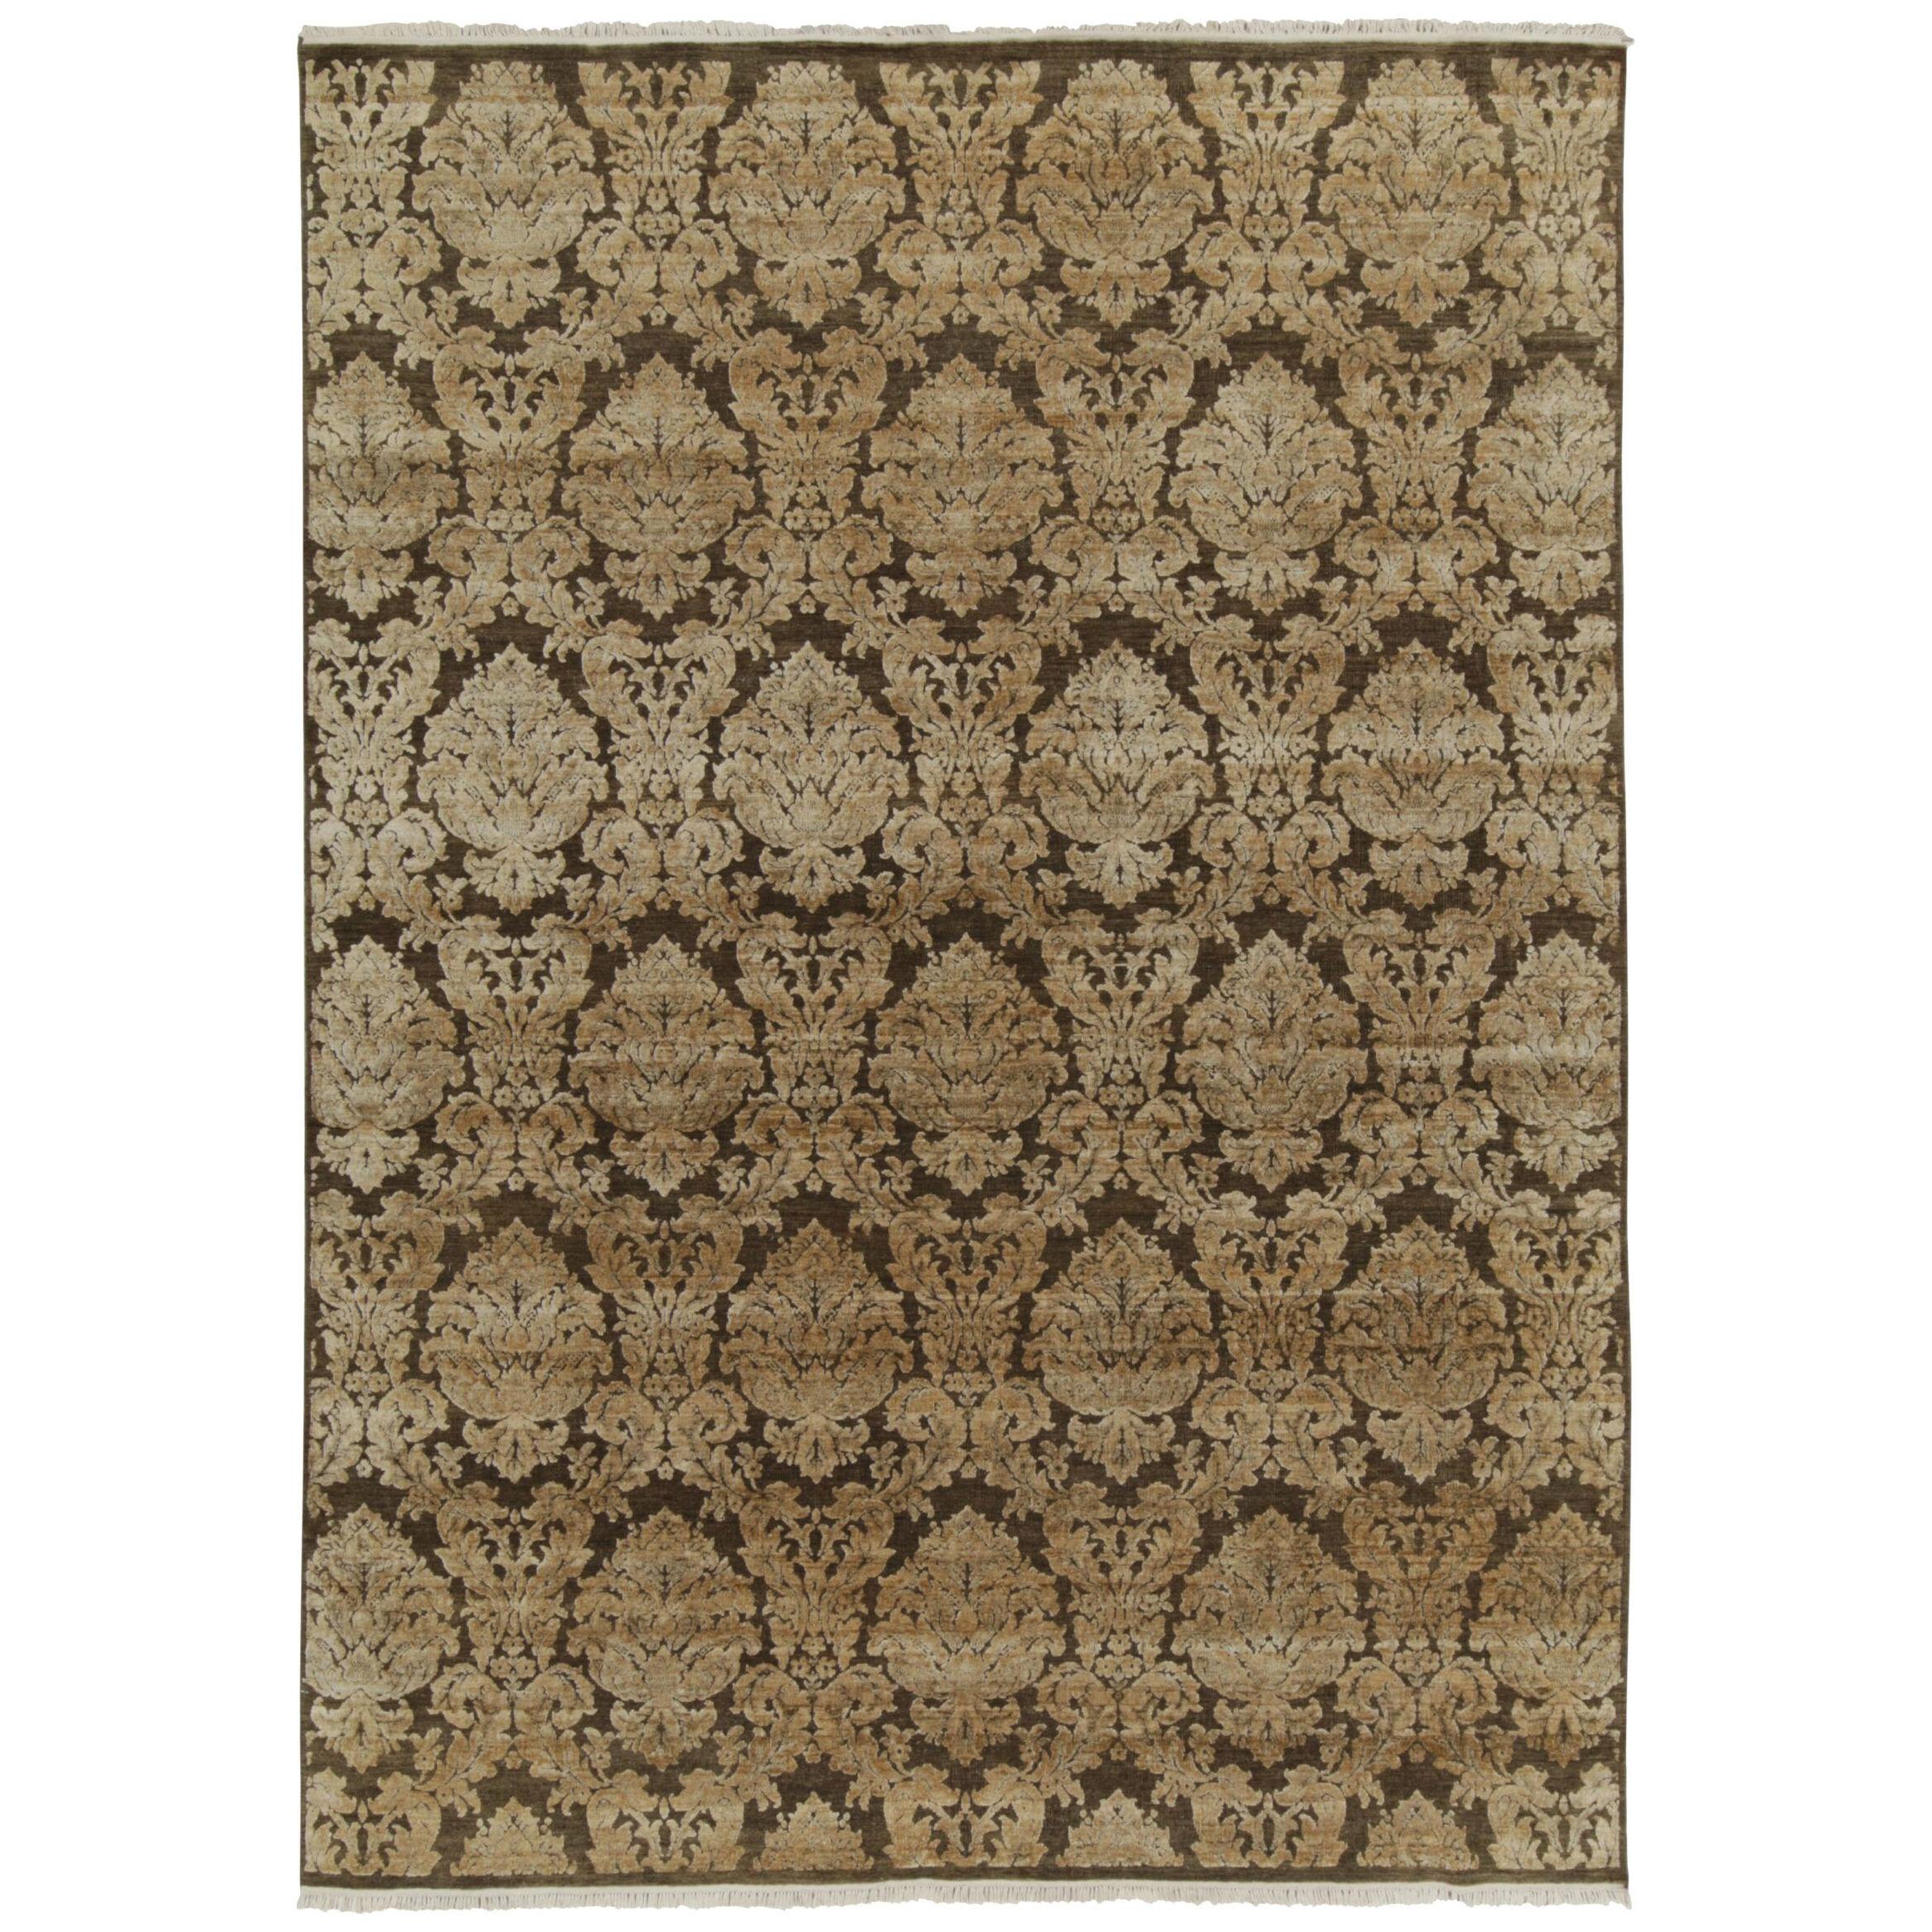 Rug & Kilim’s Classic Italian Style Rug in Brown With Gold Floral Patterns